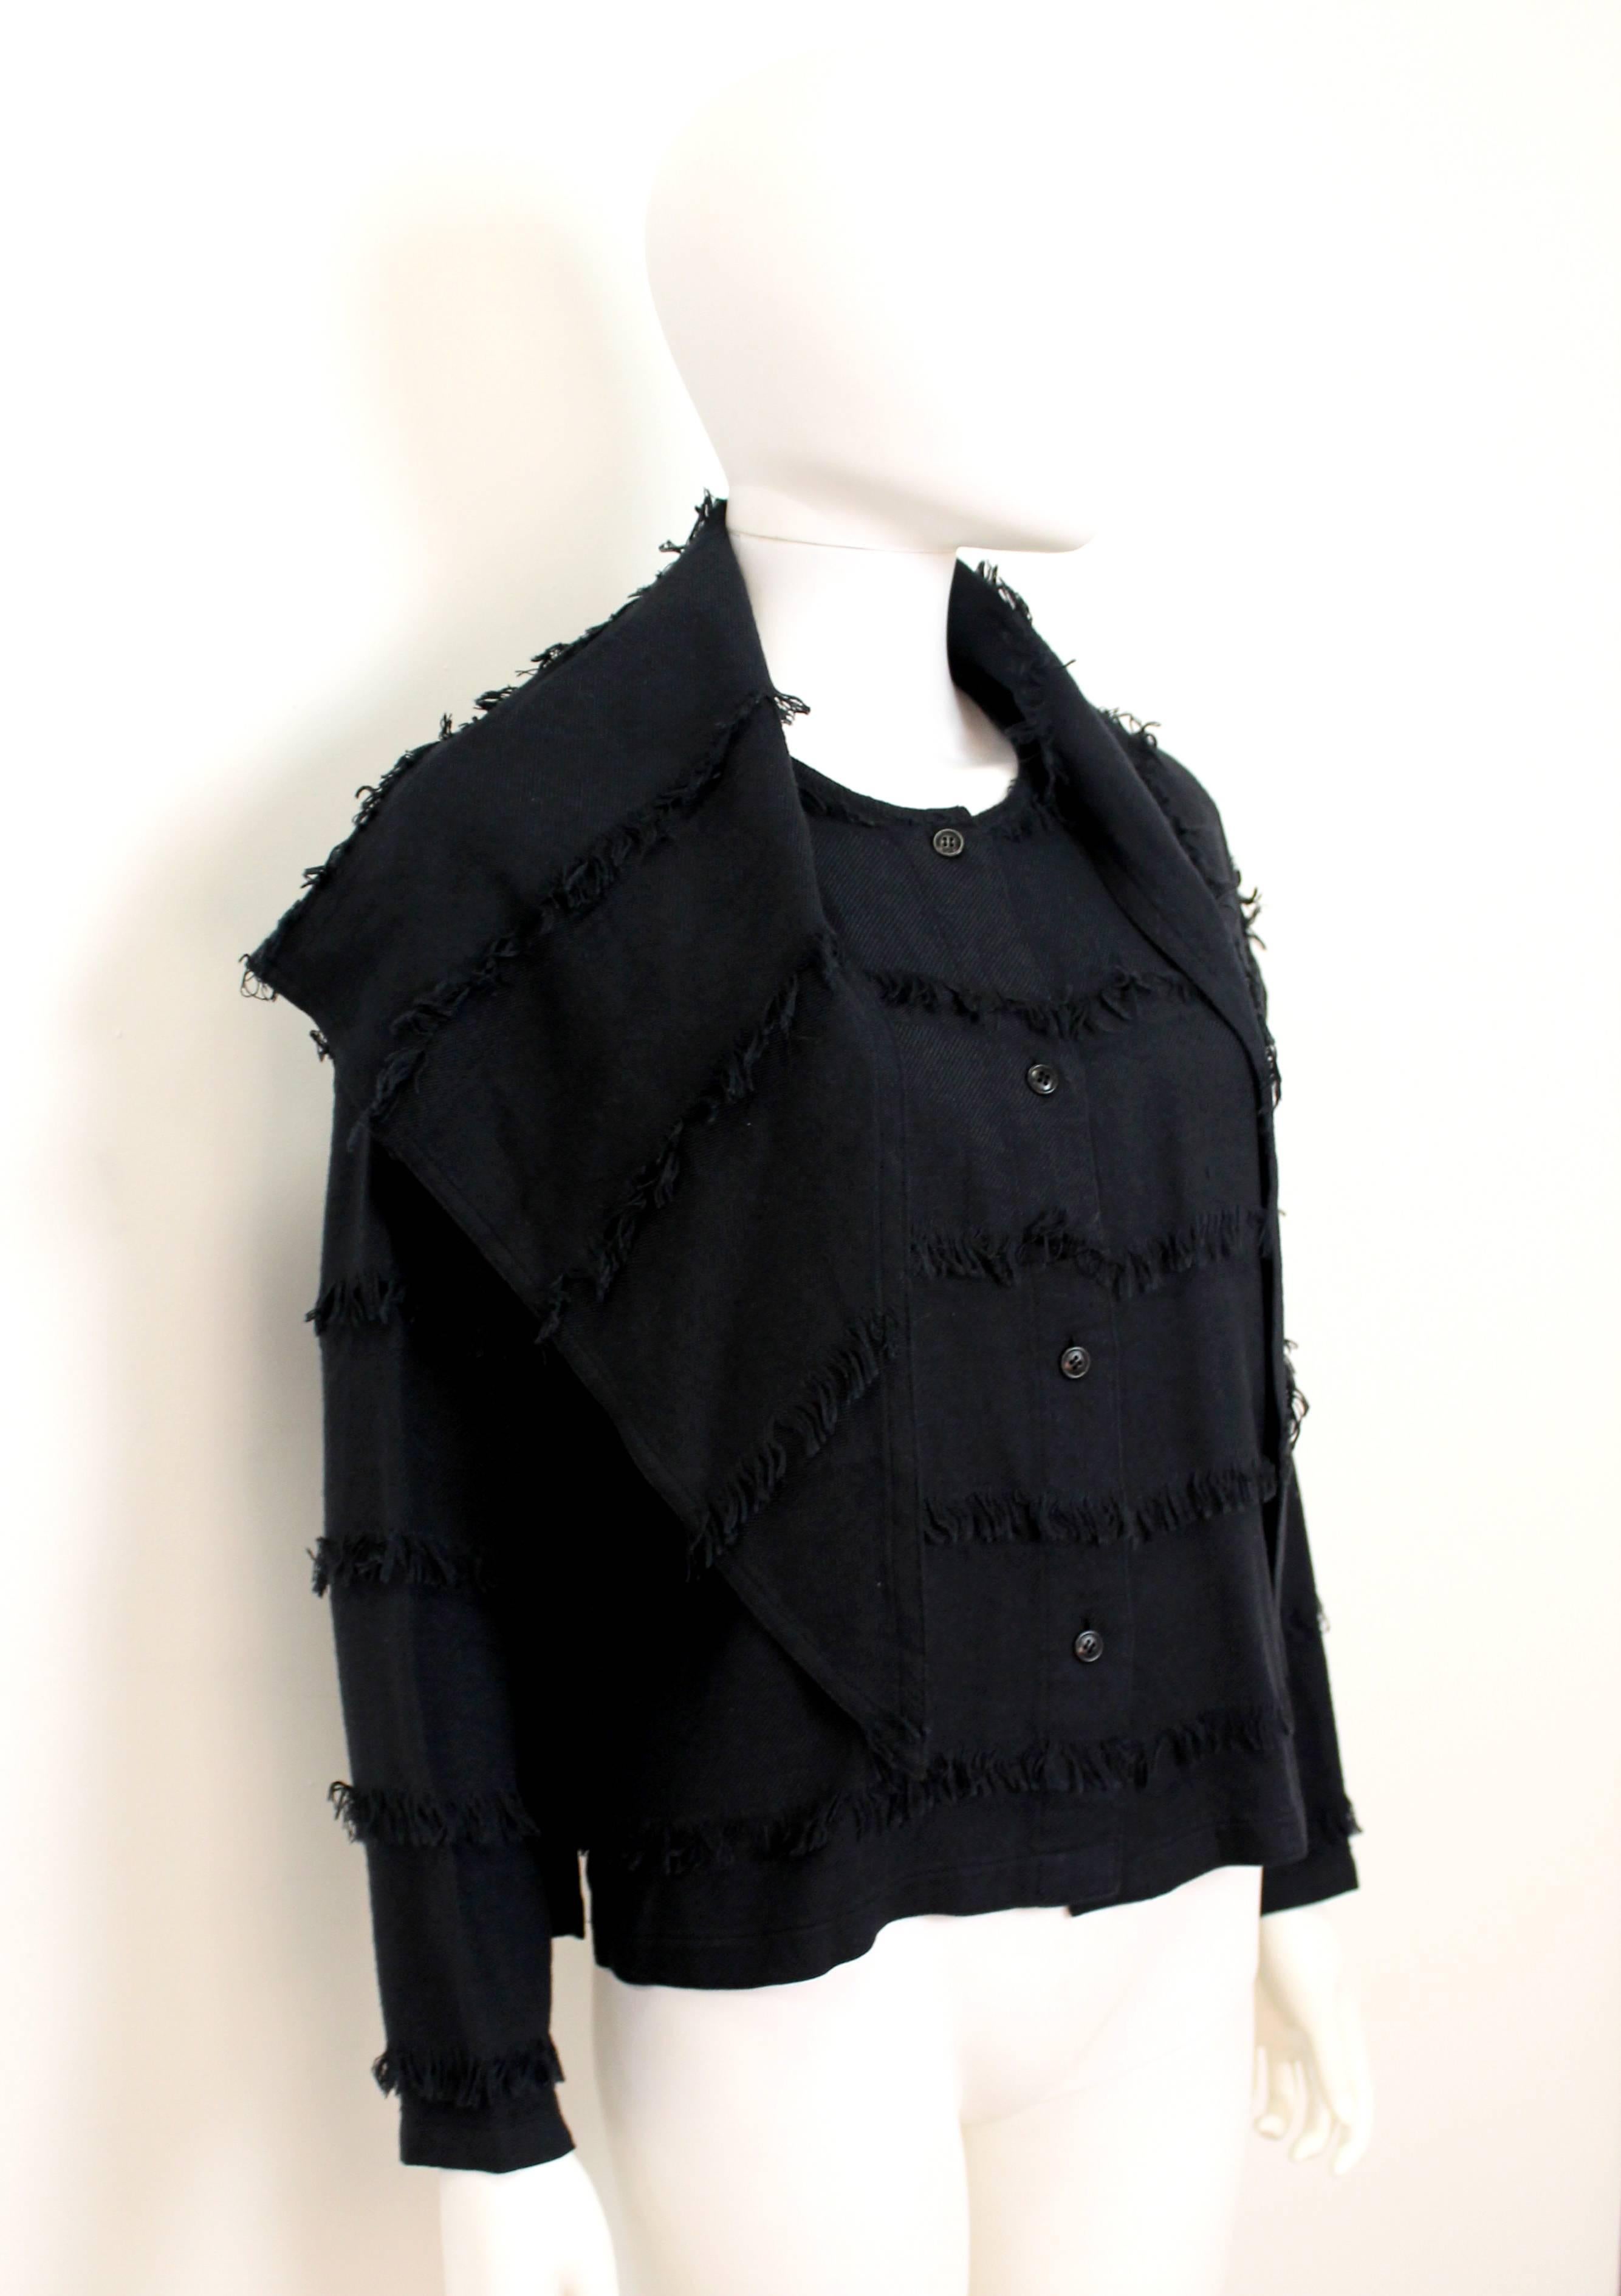 Very wearable Issey Miyake fringe jacket from the 1980's.The piece has a removable collar that can be worn in a number of different ways. It also features multiple levels of fringing down the front and back.